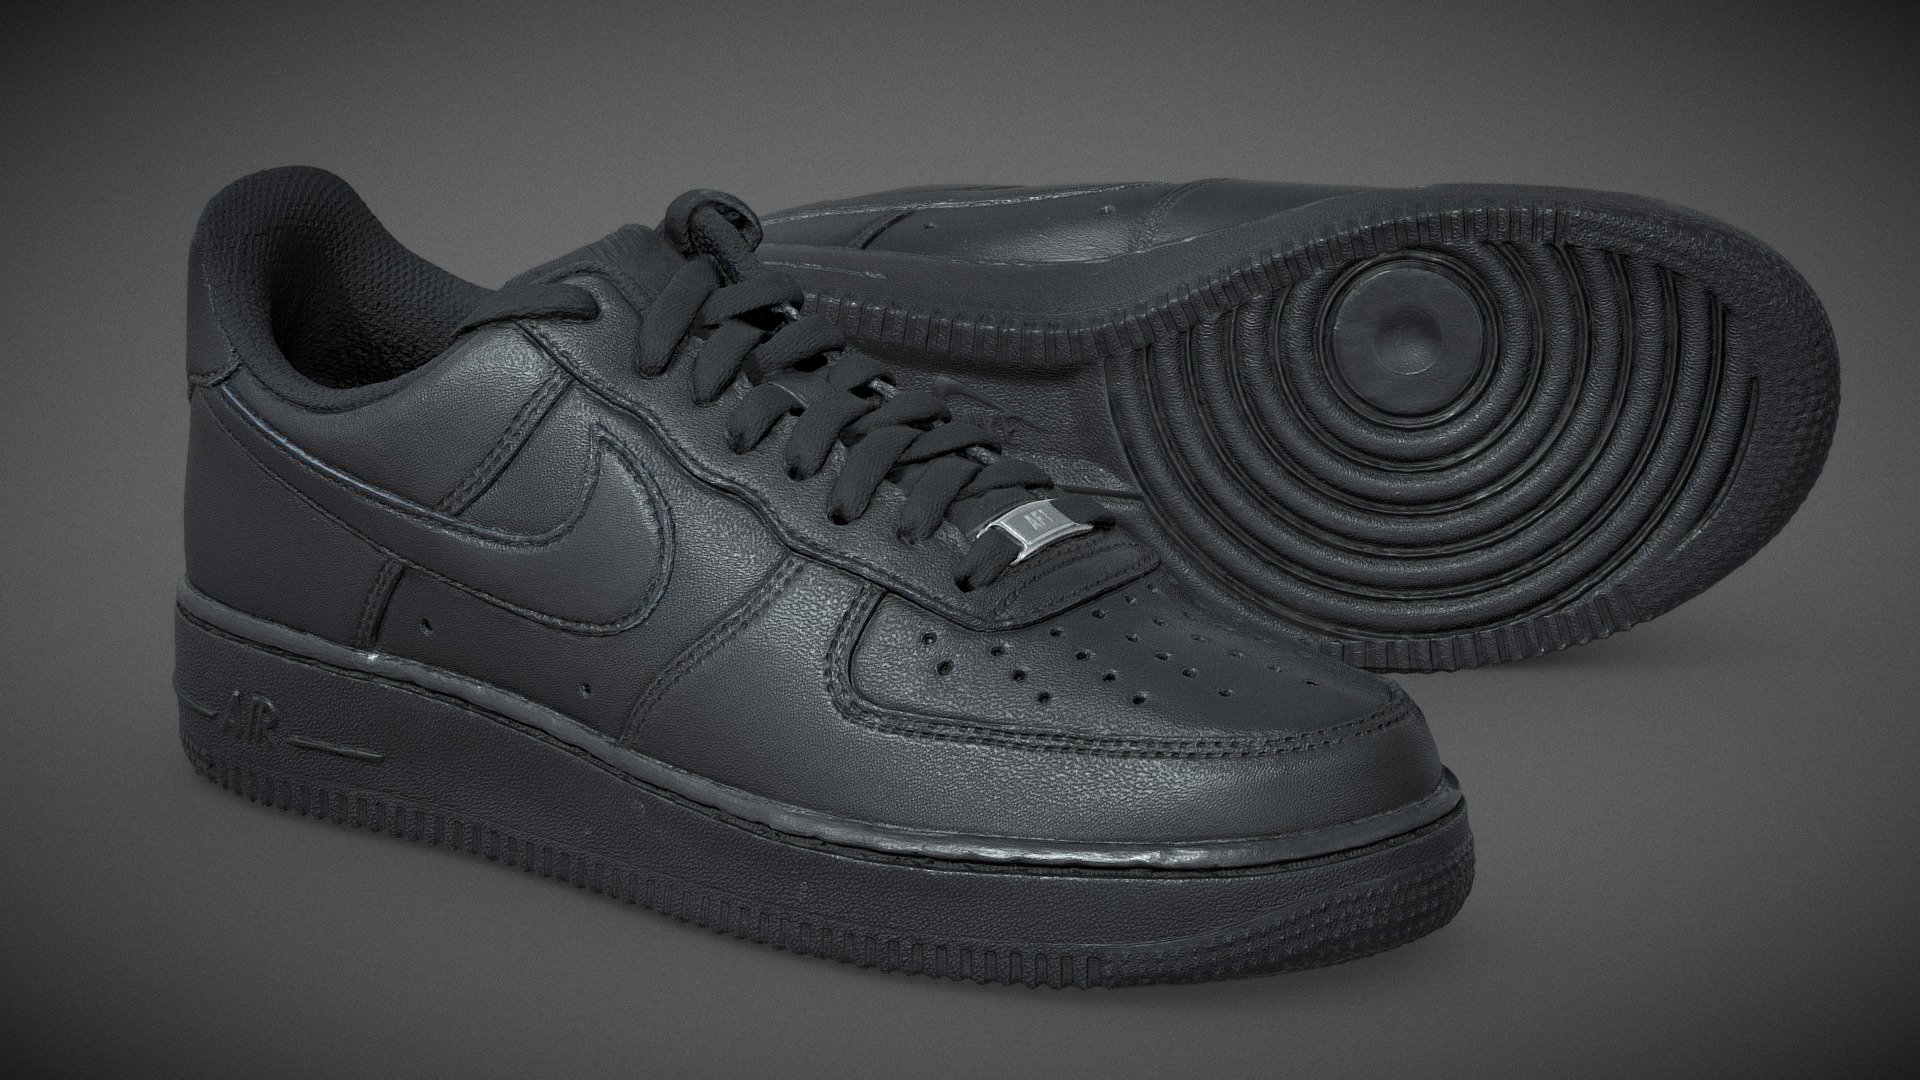 Photogrammetry scan of this Nike AirForce One black sneaker. 
Low poly asset with 4K textures maps 3d model